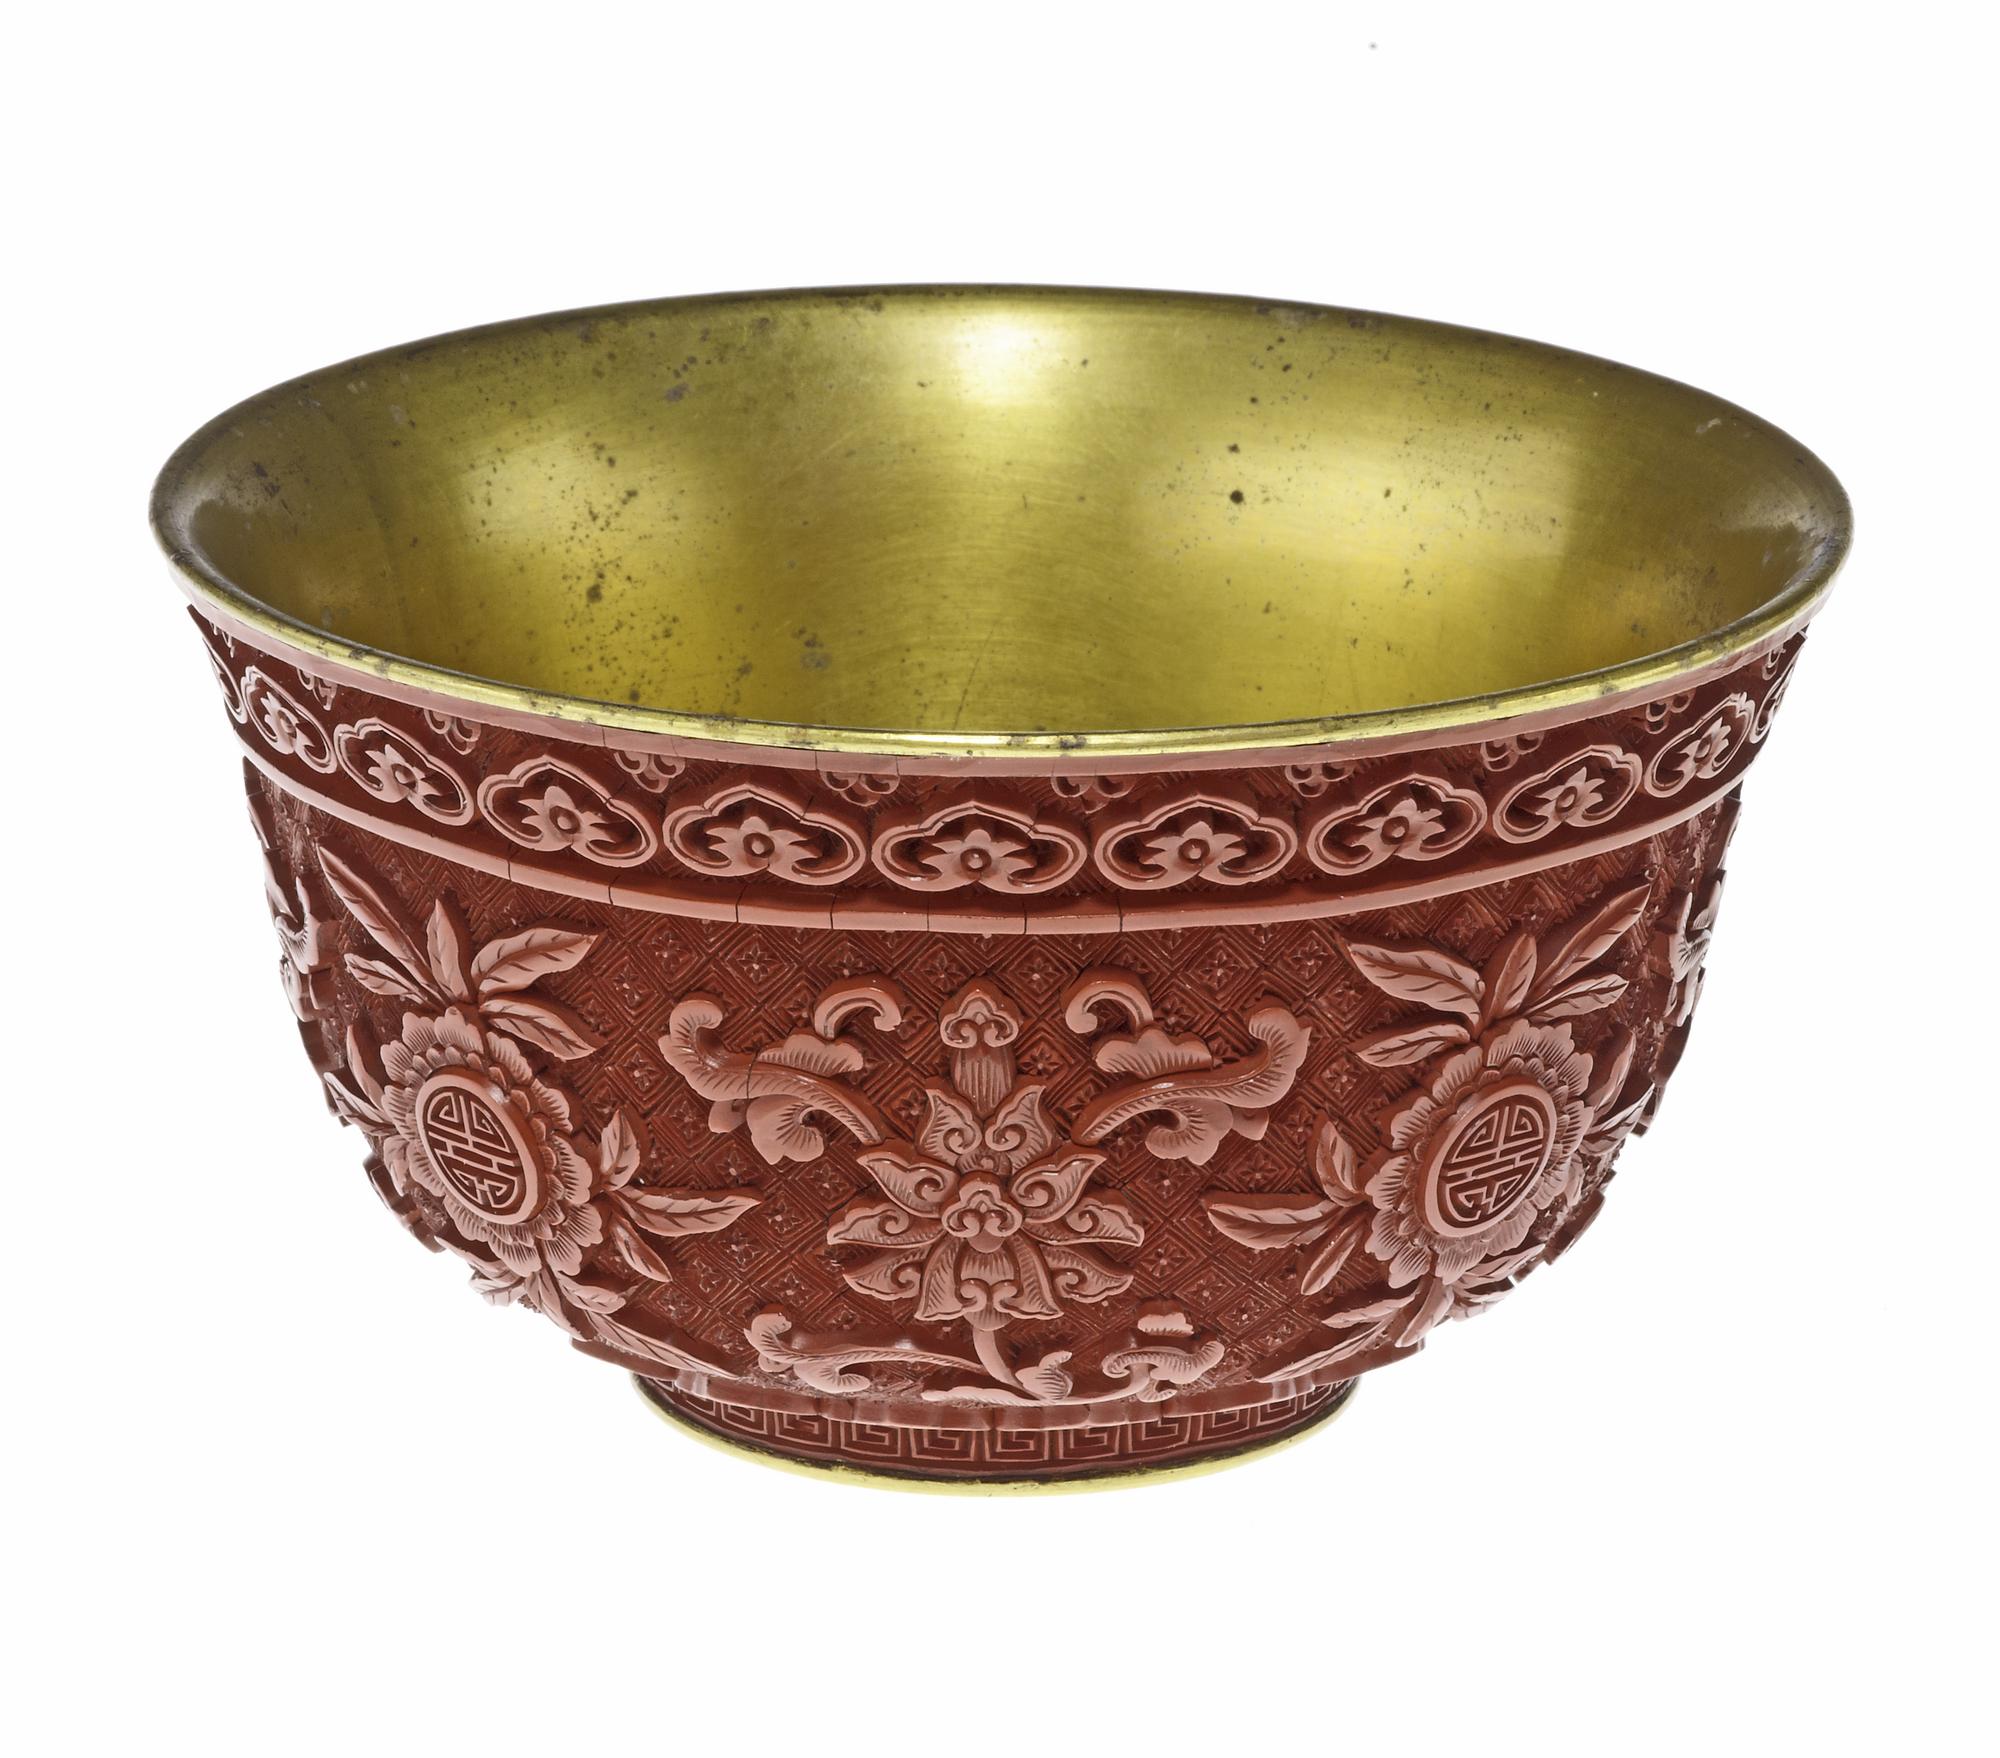 Ceremonial bowl of carved red lacquer on gilt metal, with alternate sprays of lotus and peach blossom and the longevity character Shou: China, Qing dynasty, Qianlong reign, 1736-95.